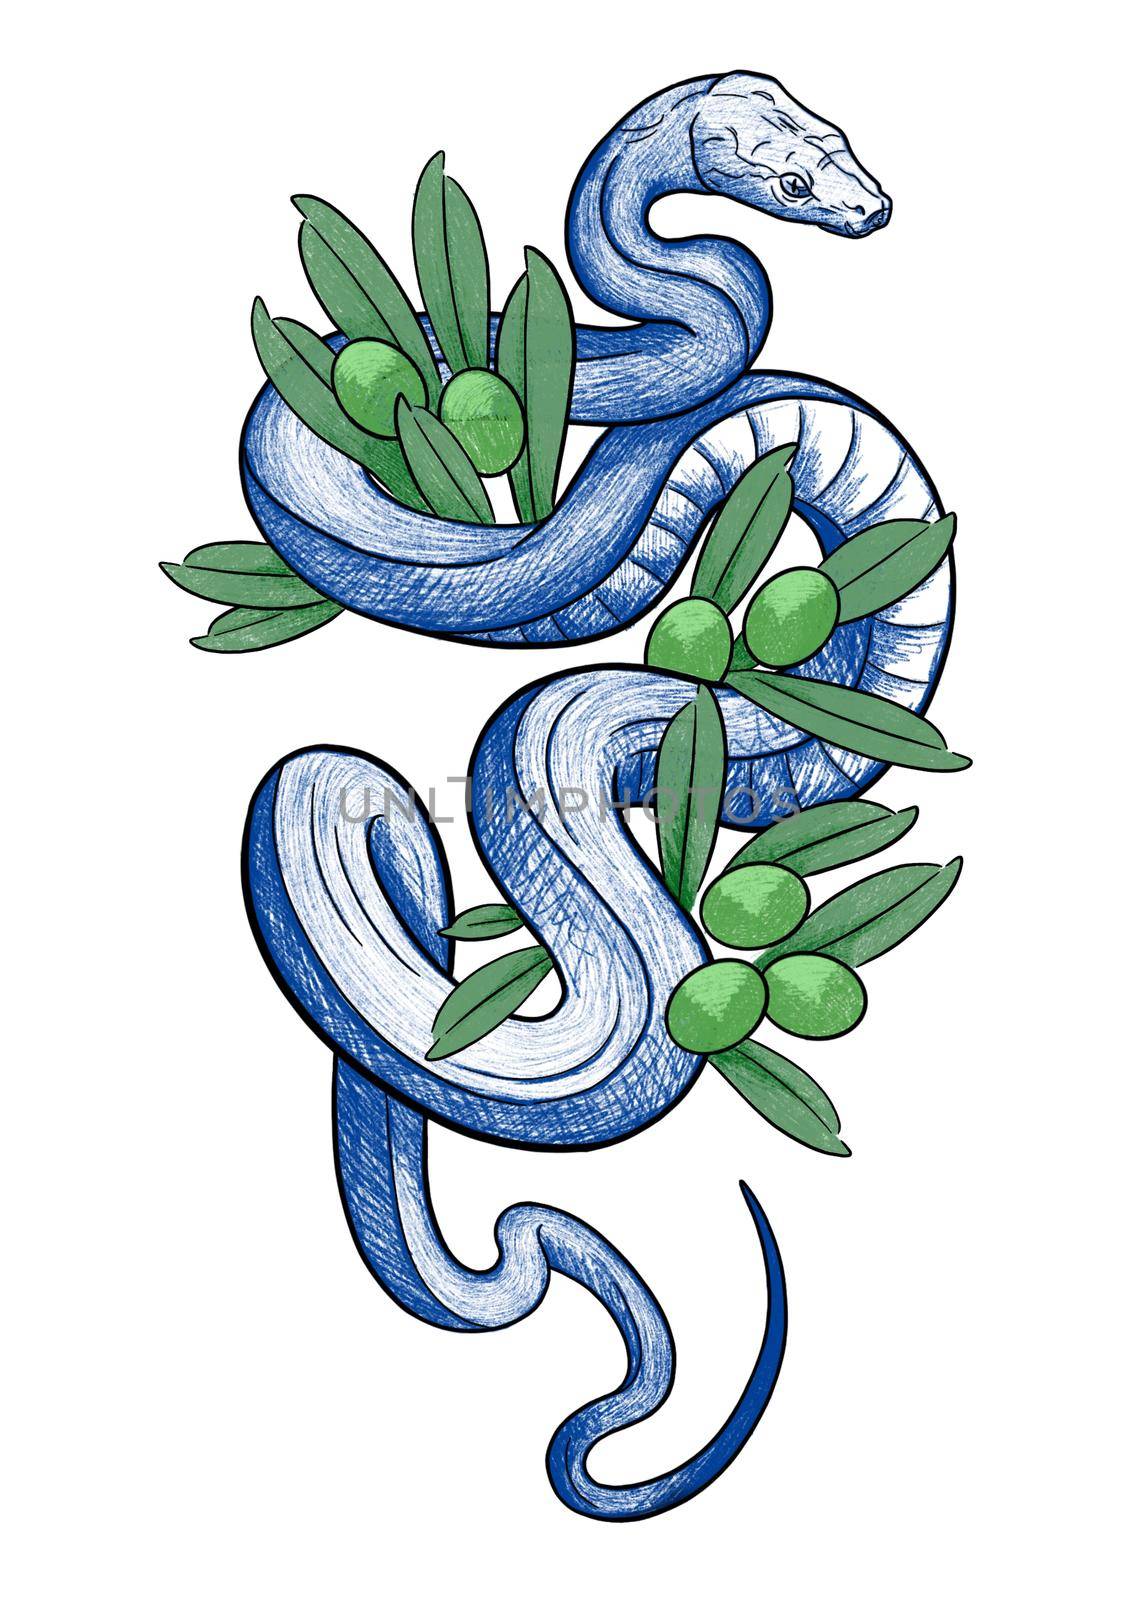 sketch of a wriggling snake with the addition of olives by kr0k0